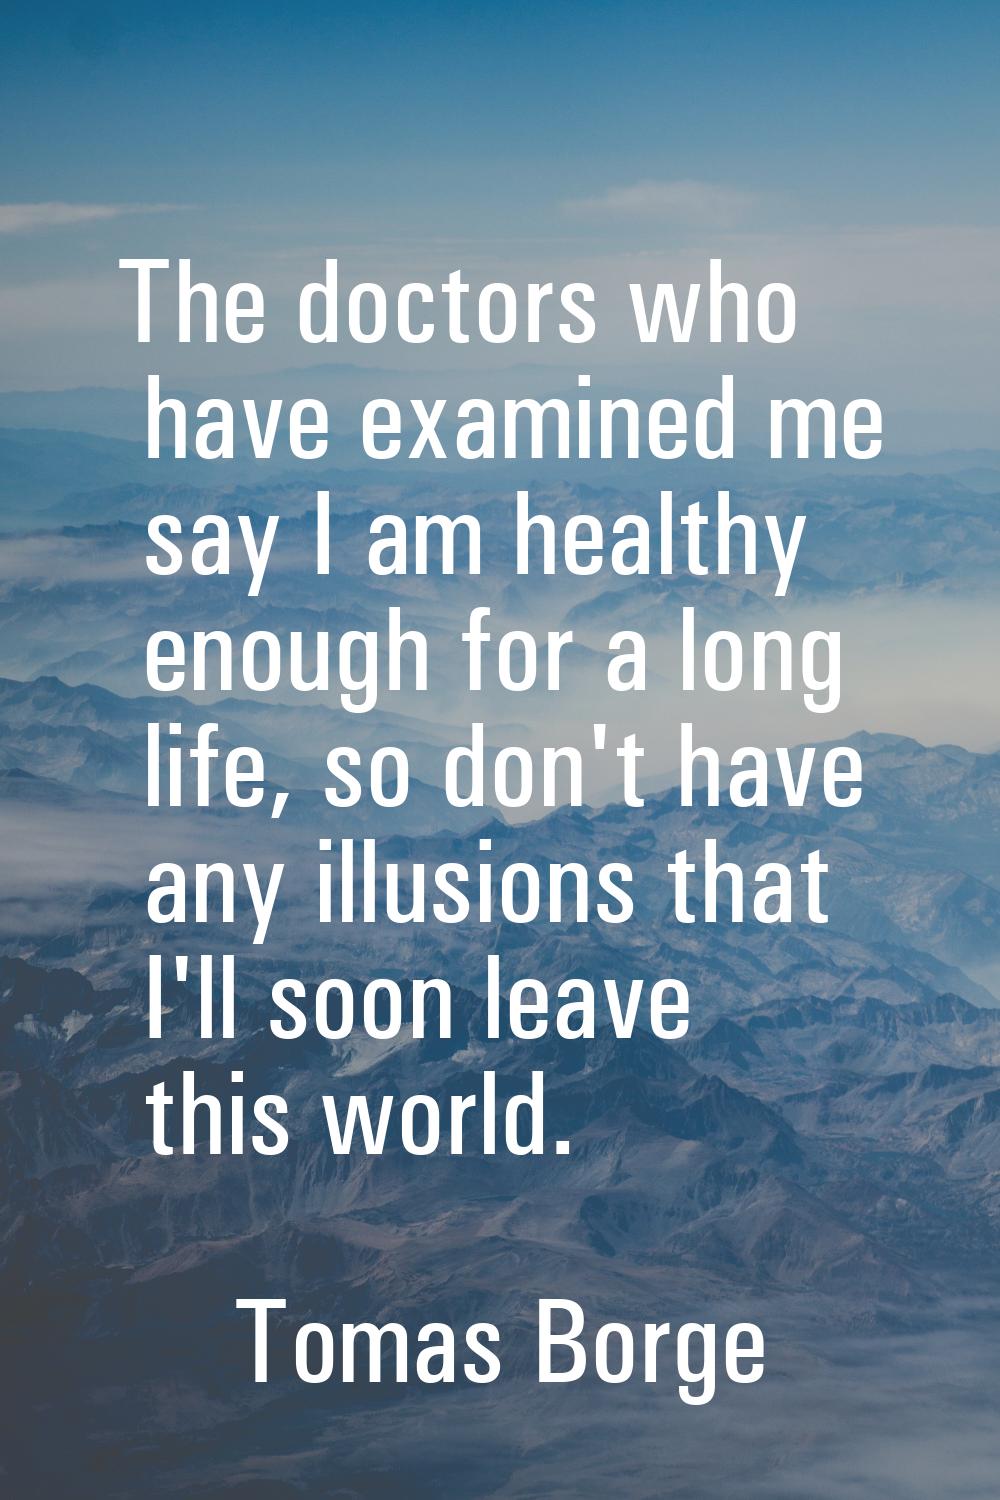 The doctors who have examined me say I am healthy enough for a long life, so don't have any illusio